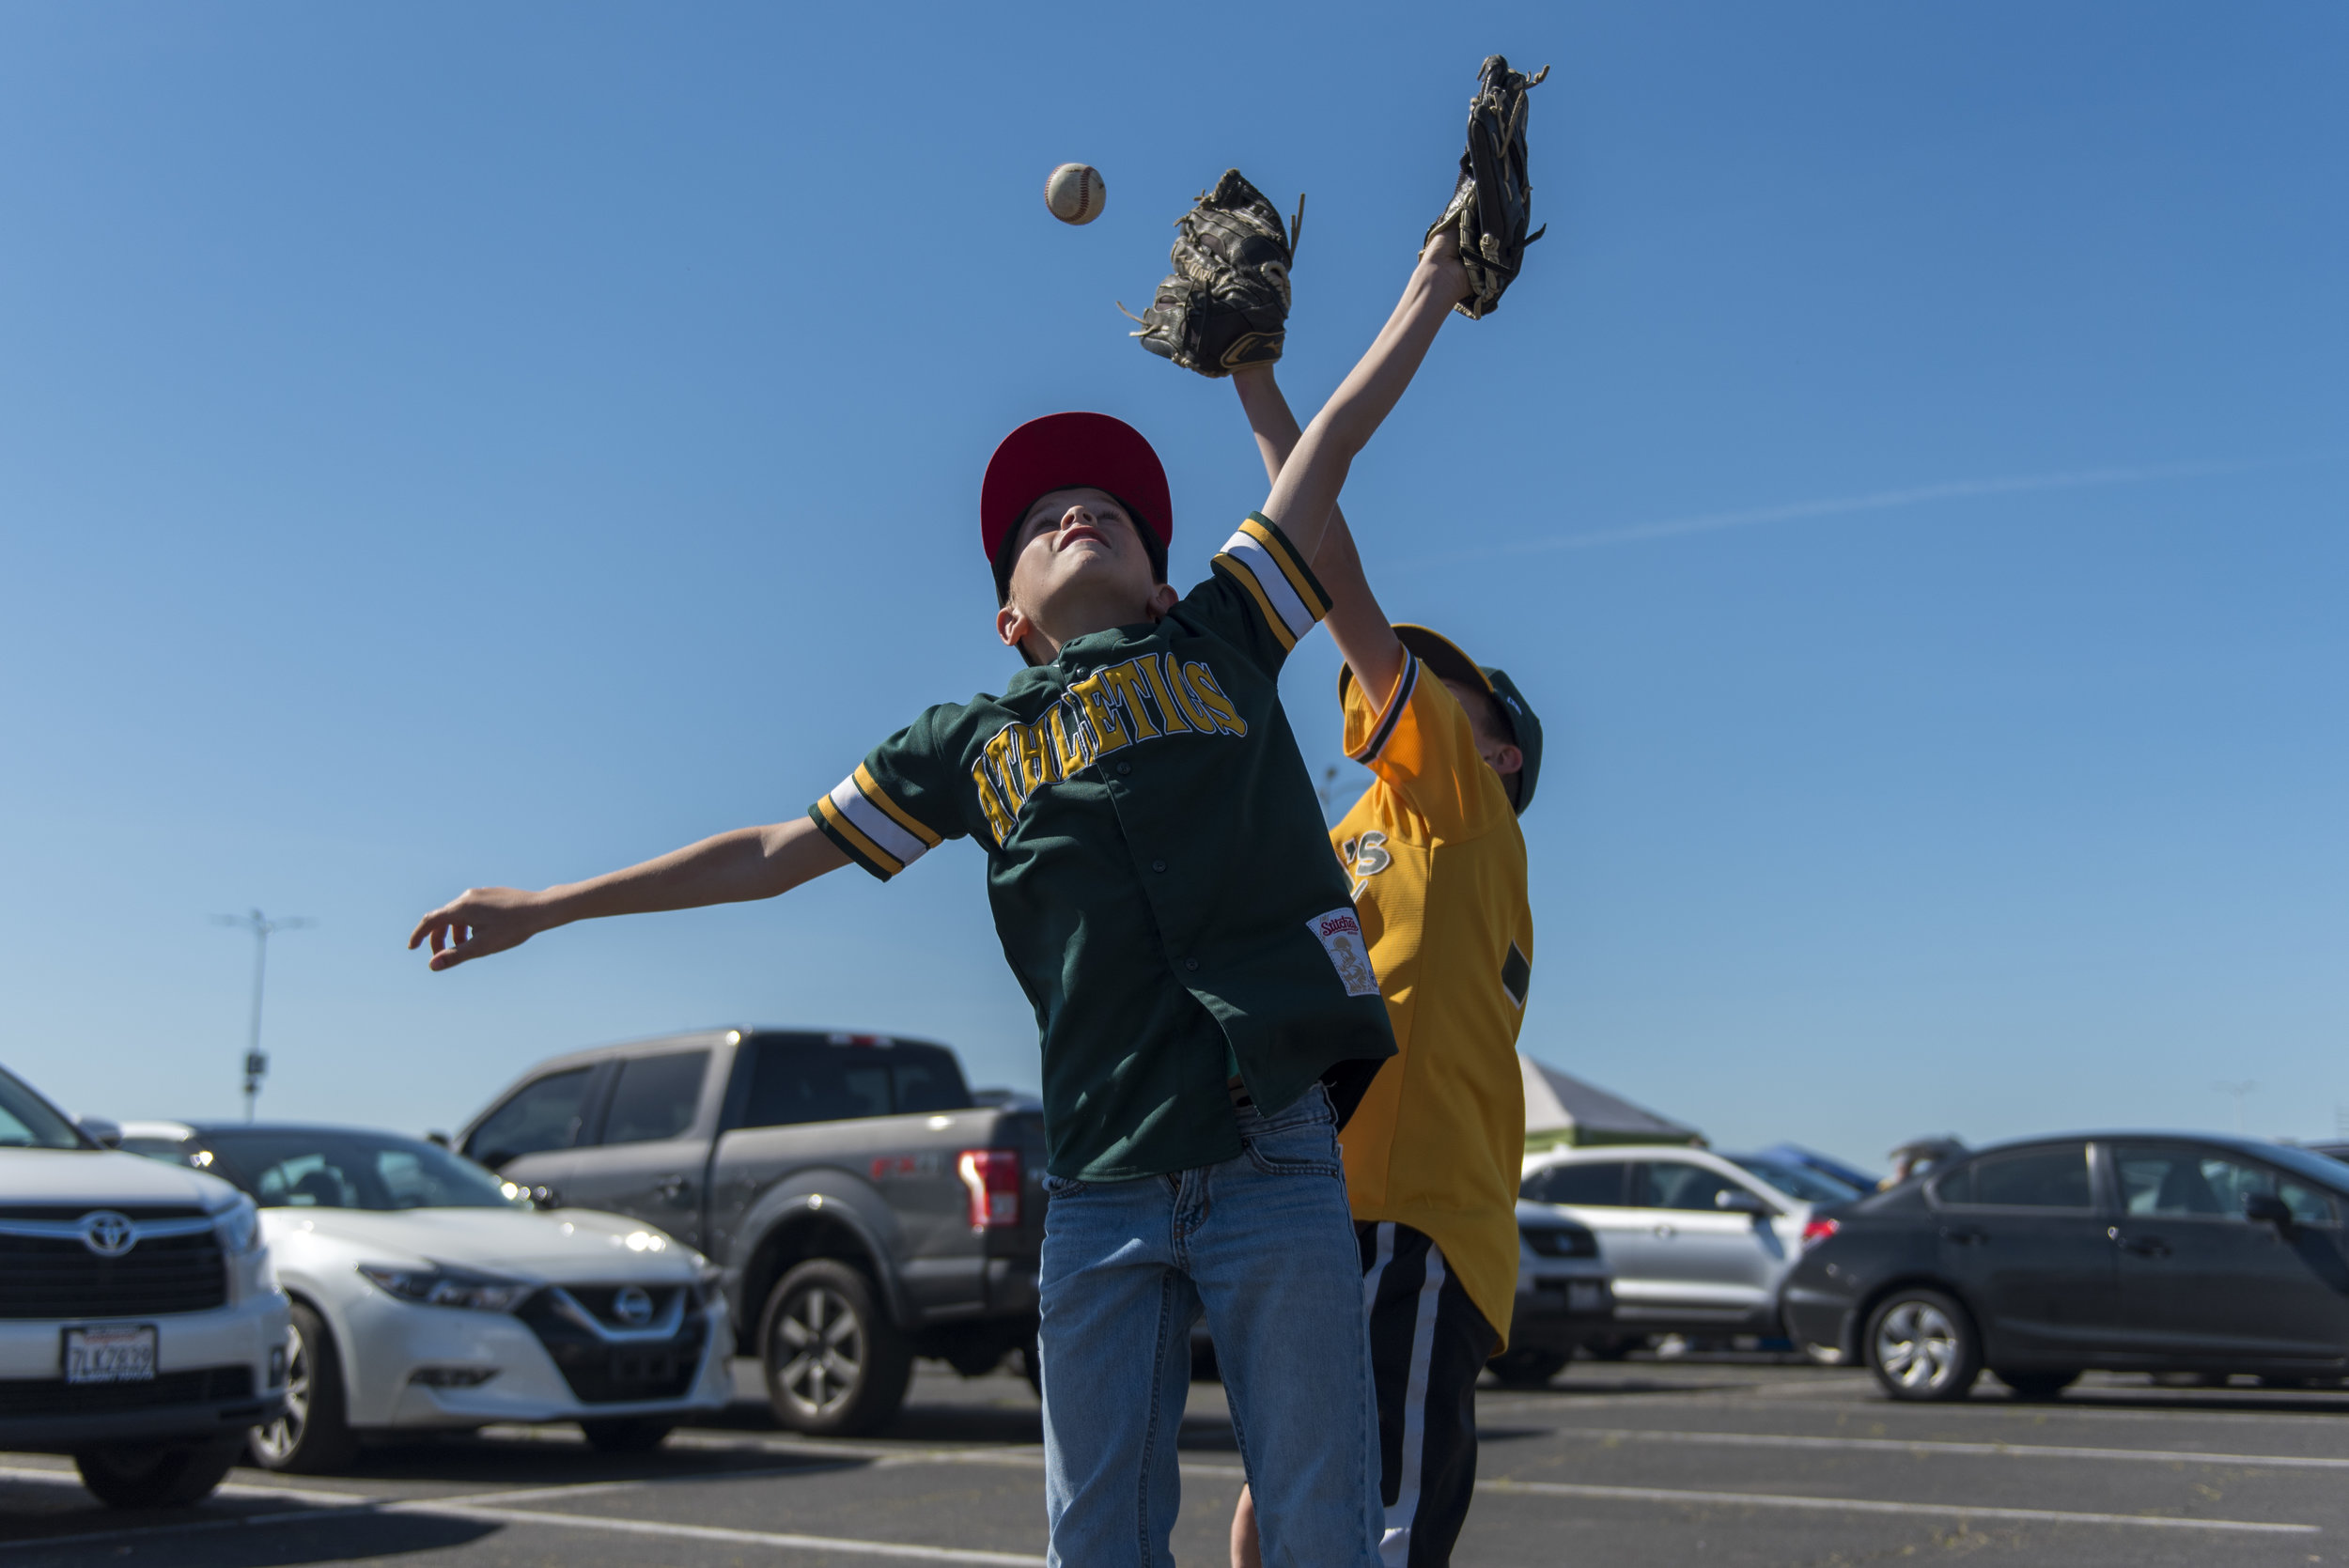  Chase (left) and Dash Dutcher play in the Oakland Coliseum parking lot before the A’s play the L.A. Angels on Thursday, March 29, 2018. | Rosa Furneaux, Special To The Chronicle 